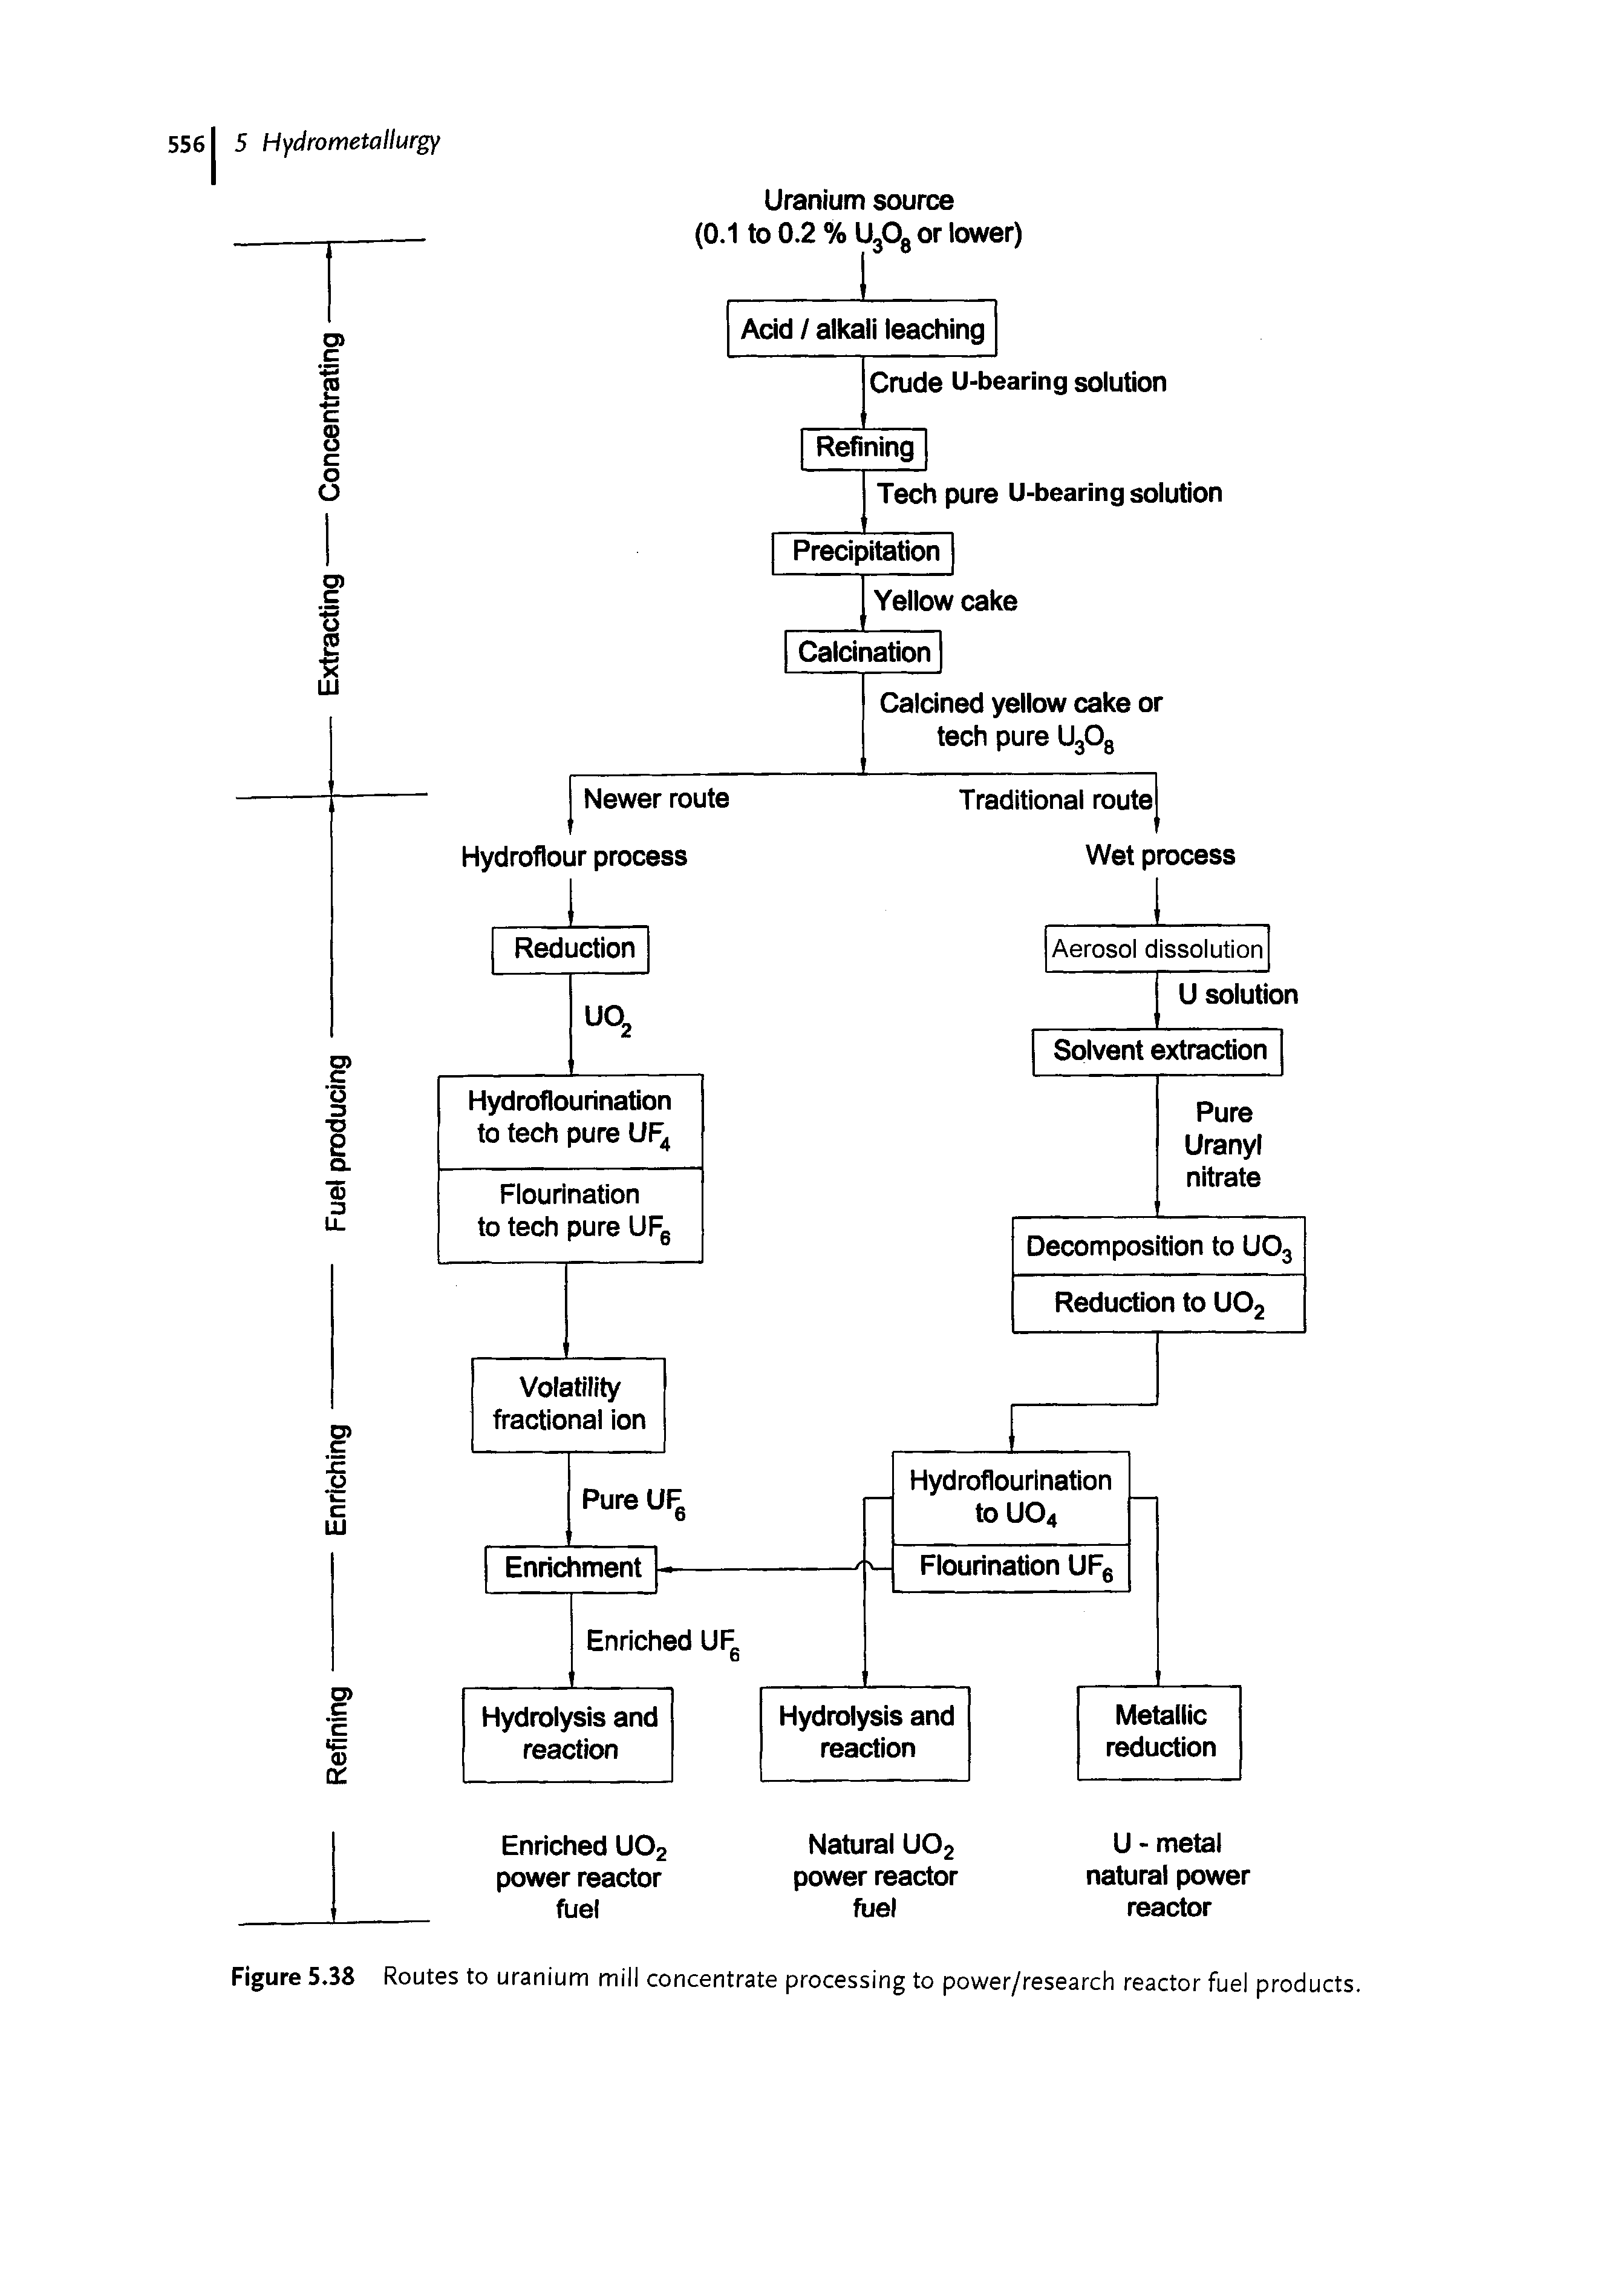 Figure 5.38 Routes to uranium mill concentrate processing to power /research reactor fuel products.